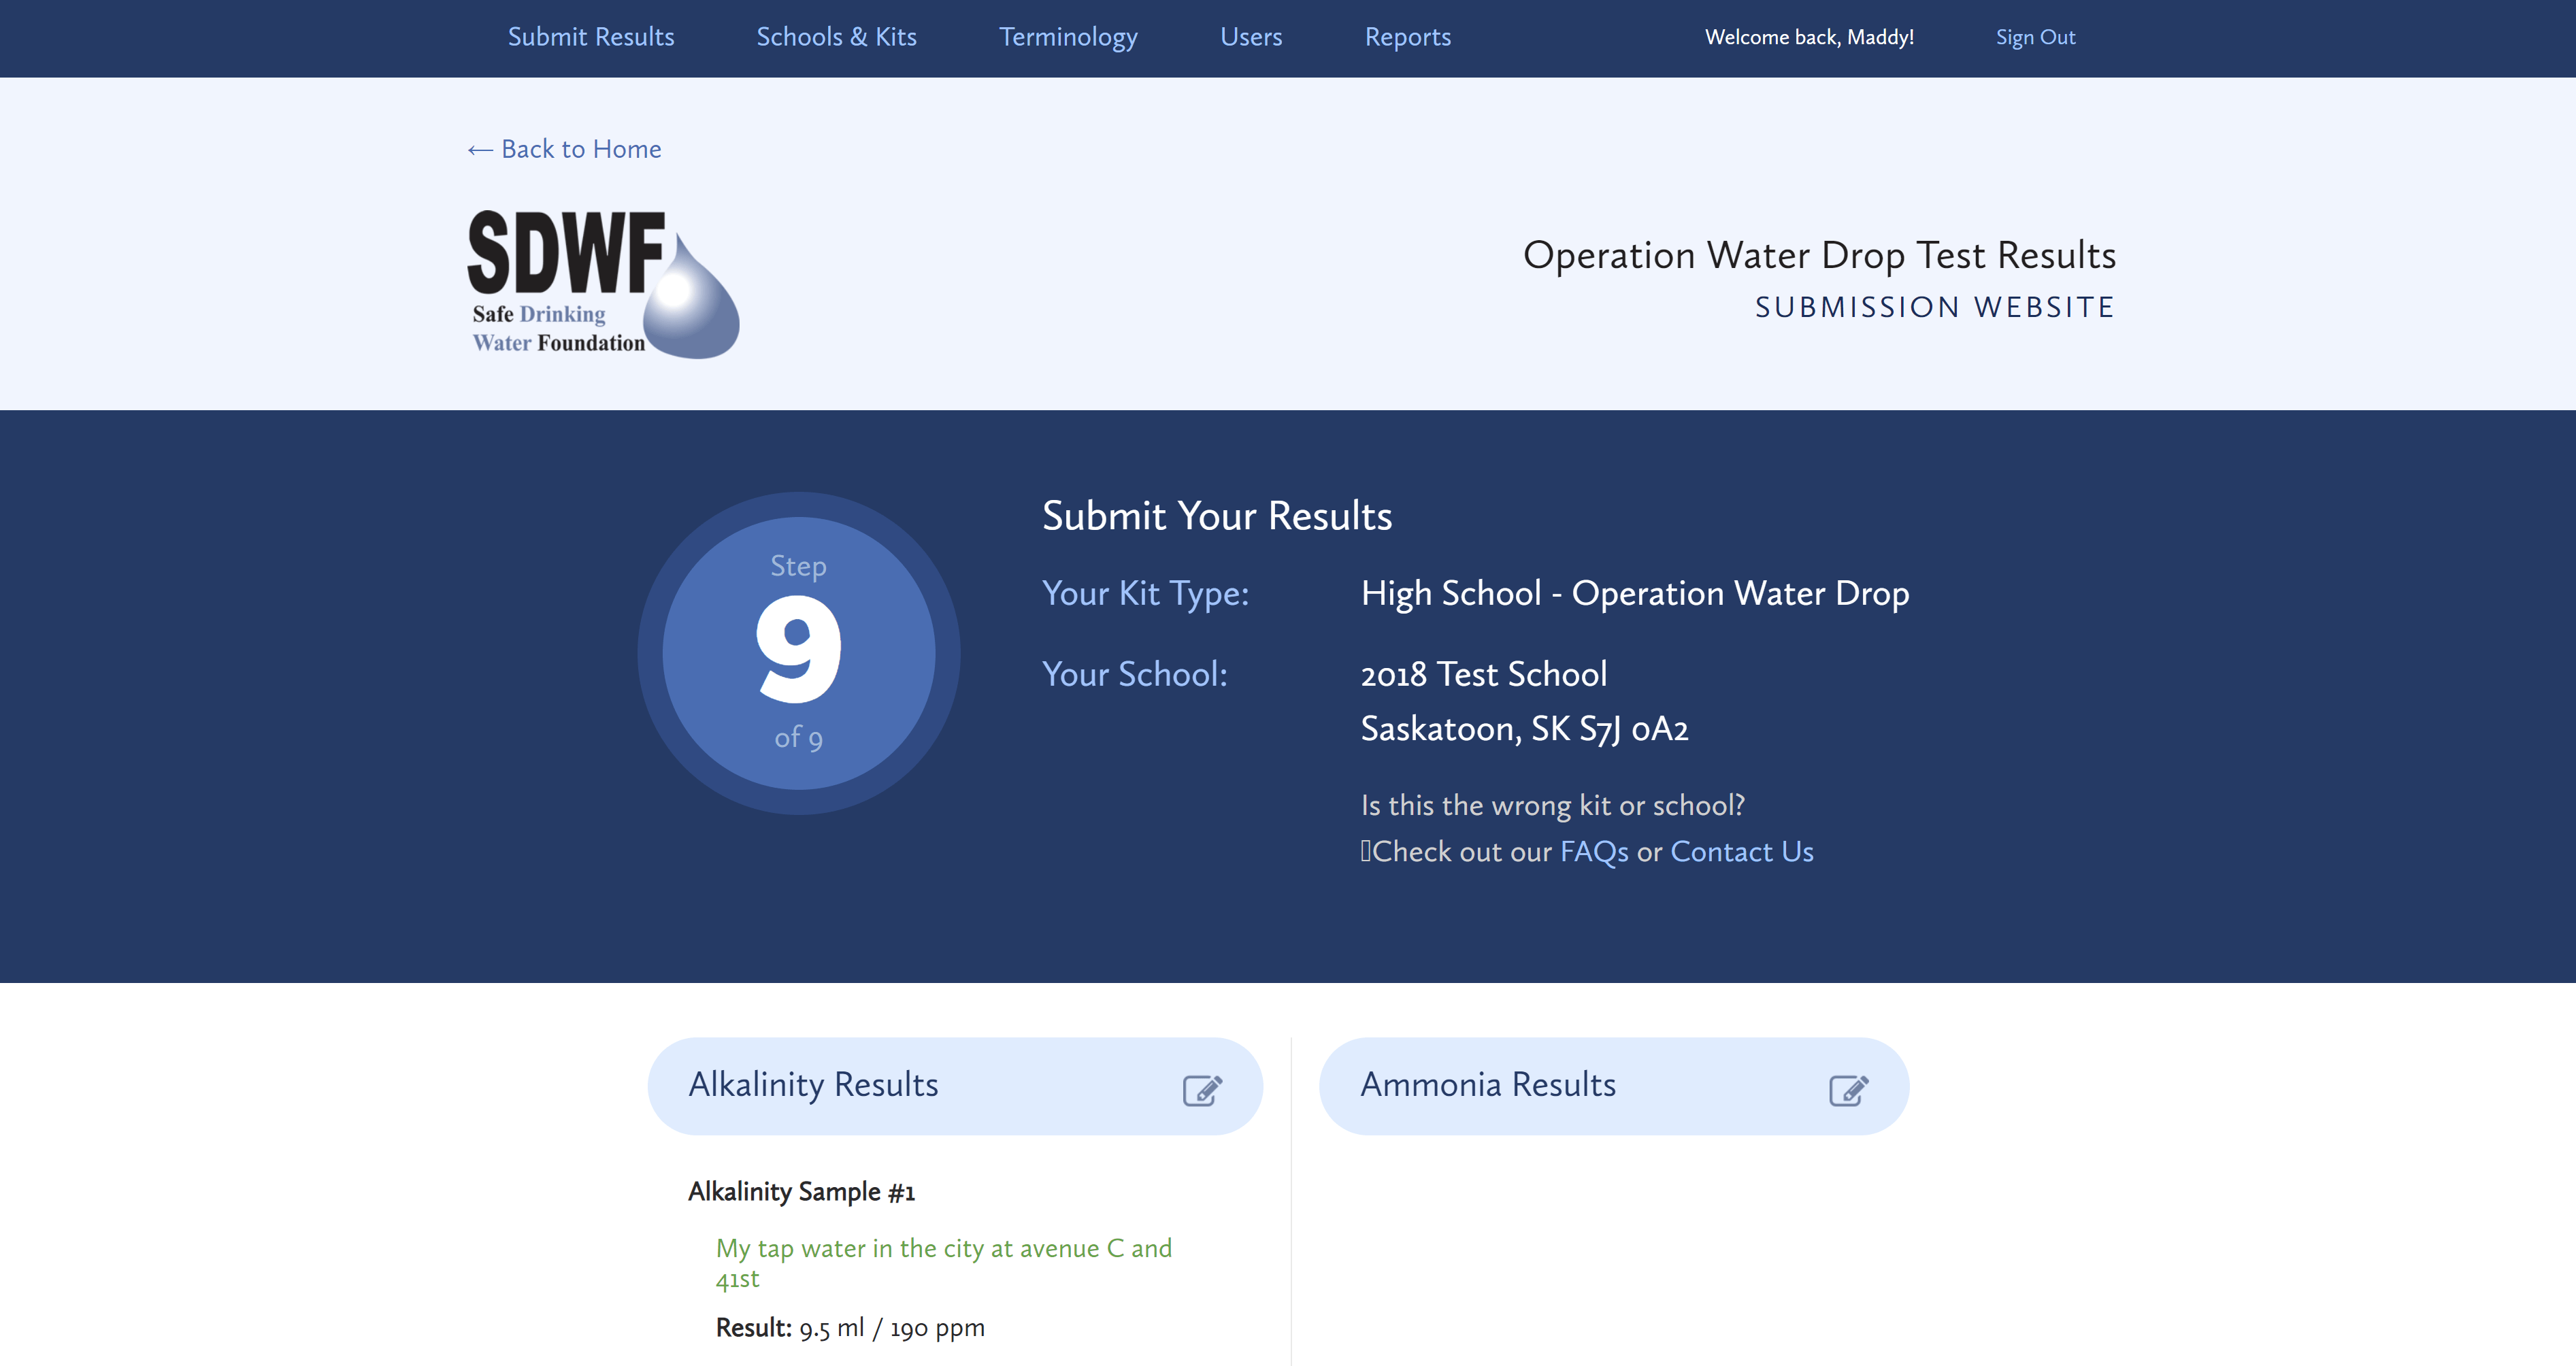 SDWF test submission website